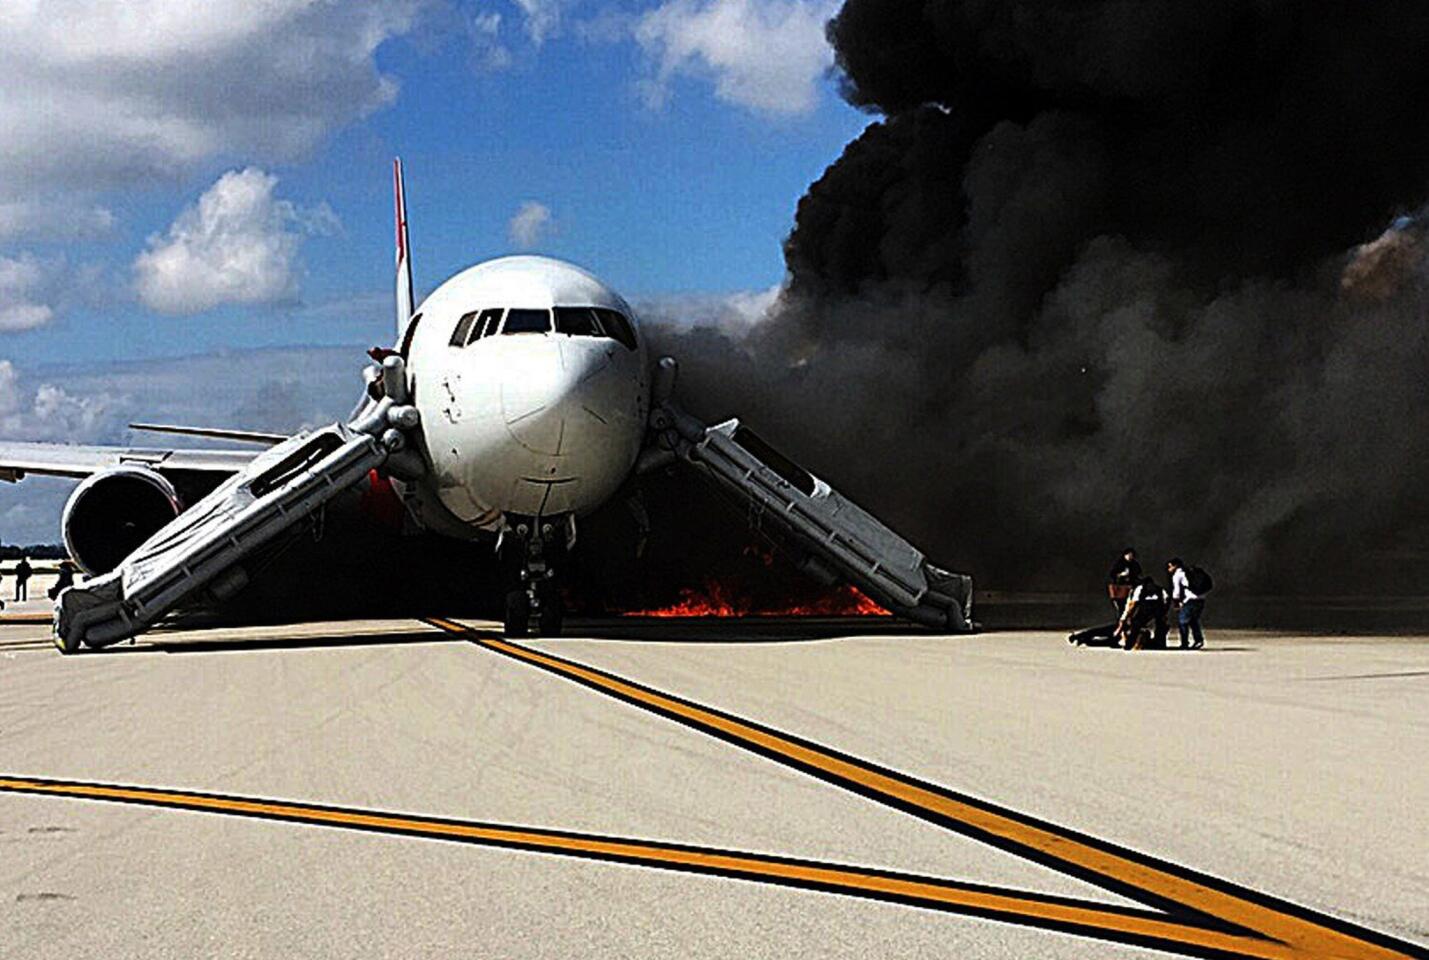 Passengers evacuate a plane that caught fire at the Fort Lauderdale/Hollywood International Airport on Oct. 29, 2015.